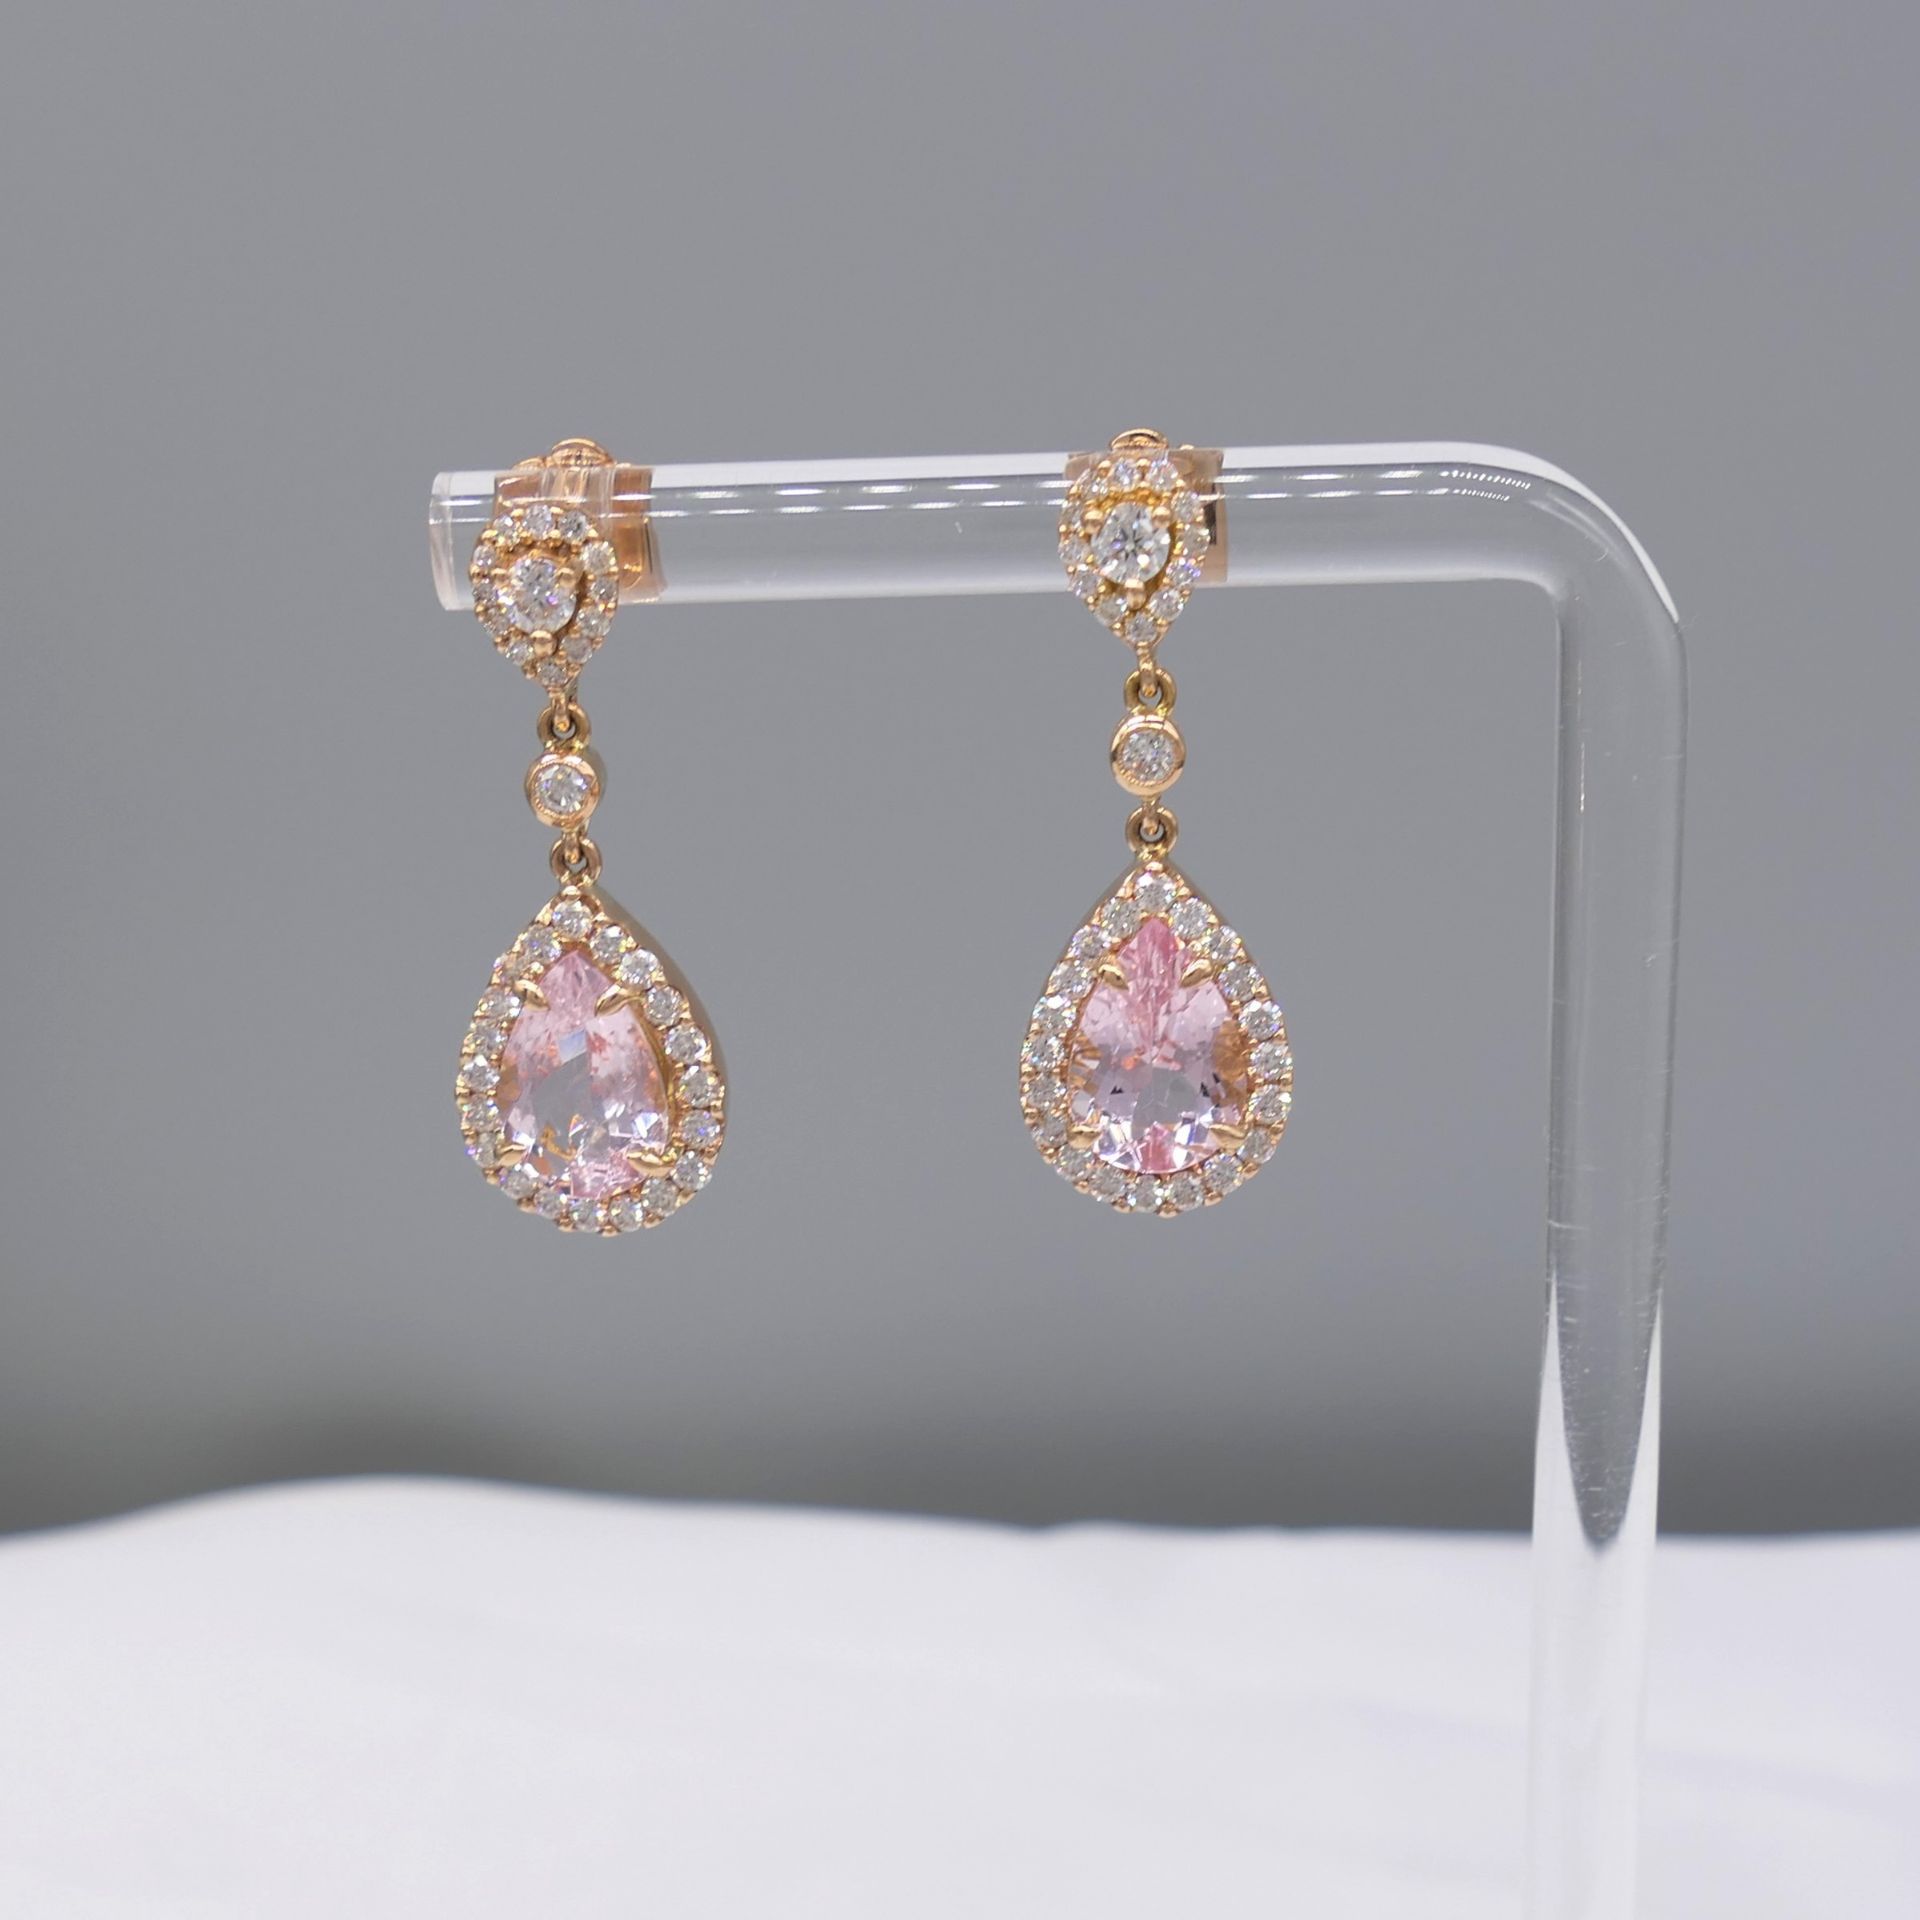 18ct Rose Gold Pear-shaped Morganite and Diamond Drop Earrings, Boxed - Image 4 of 6